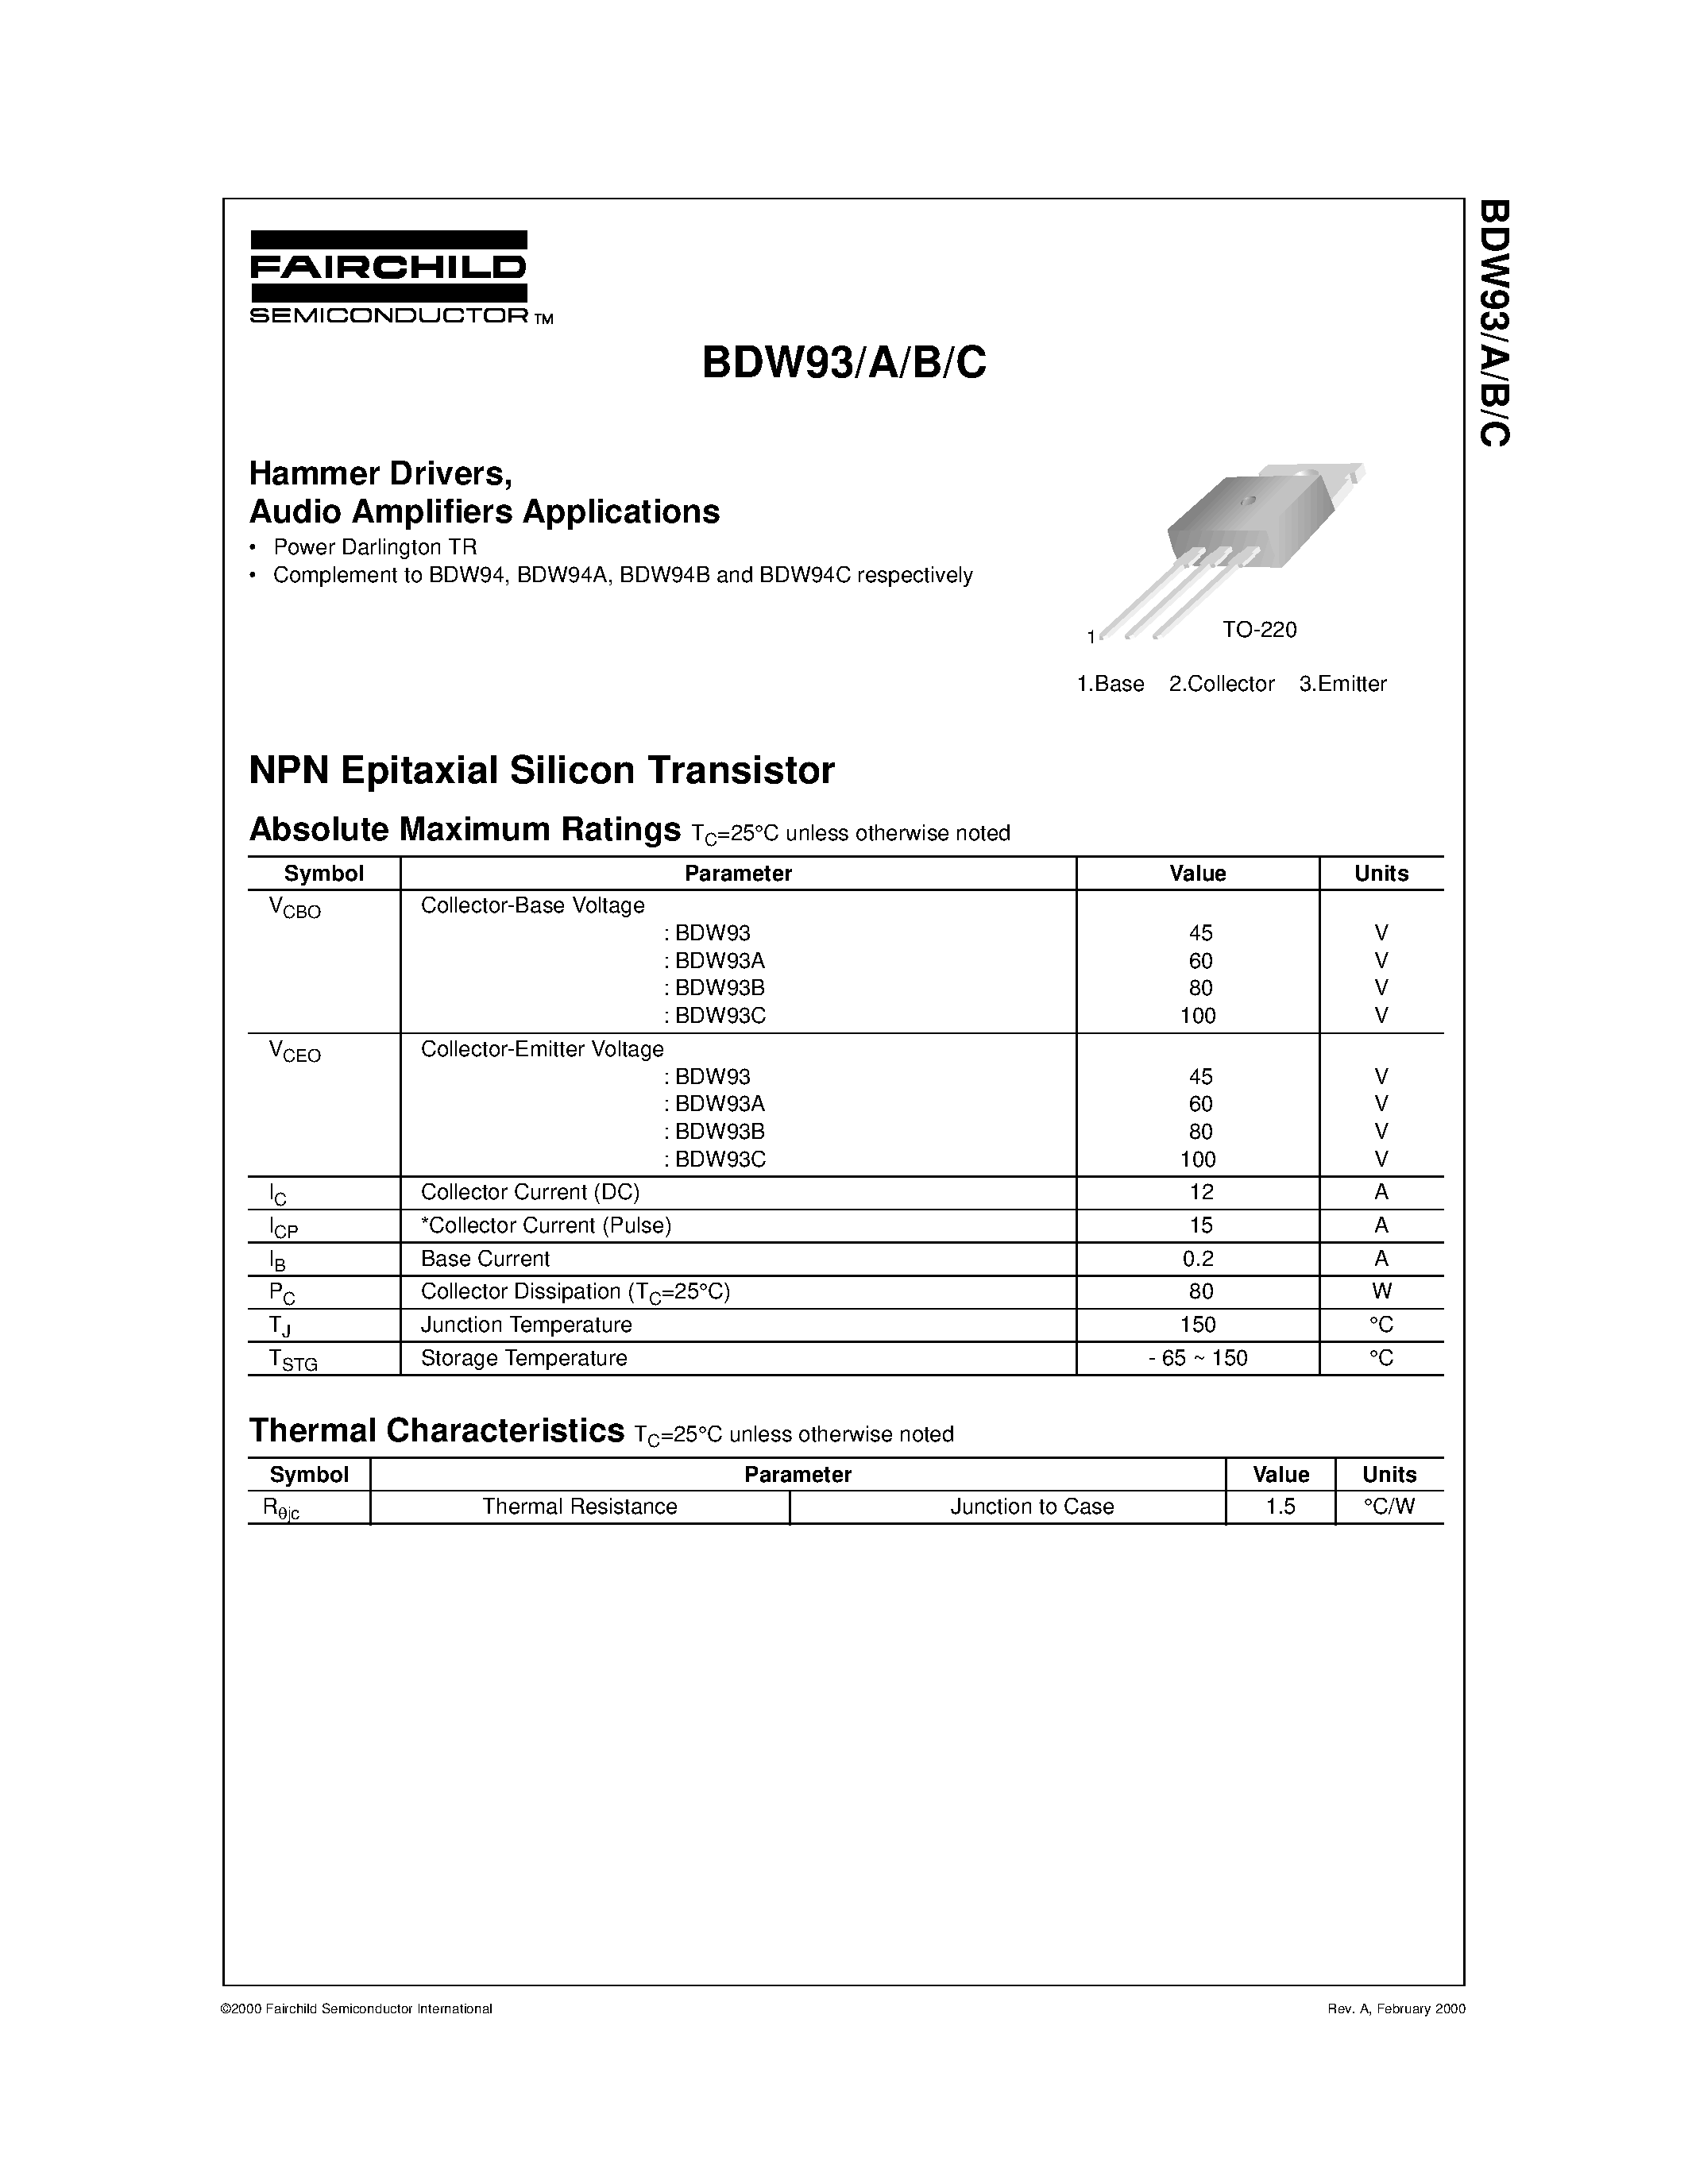 Datasheet BDW93C - Hammer Drivers/ Audio Amplifiers Applications page 1